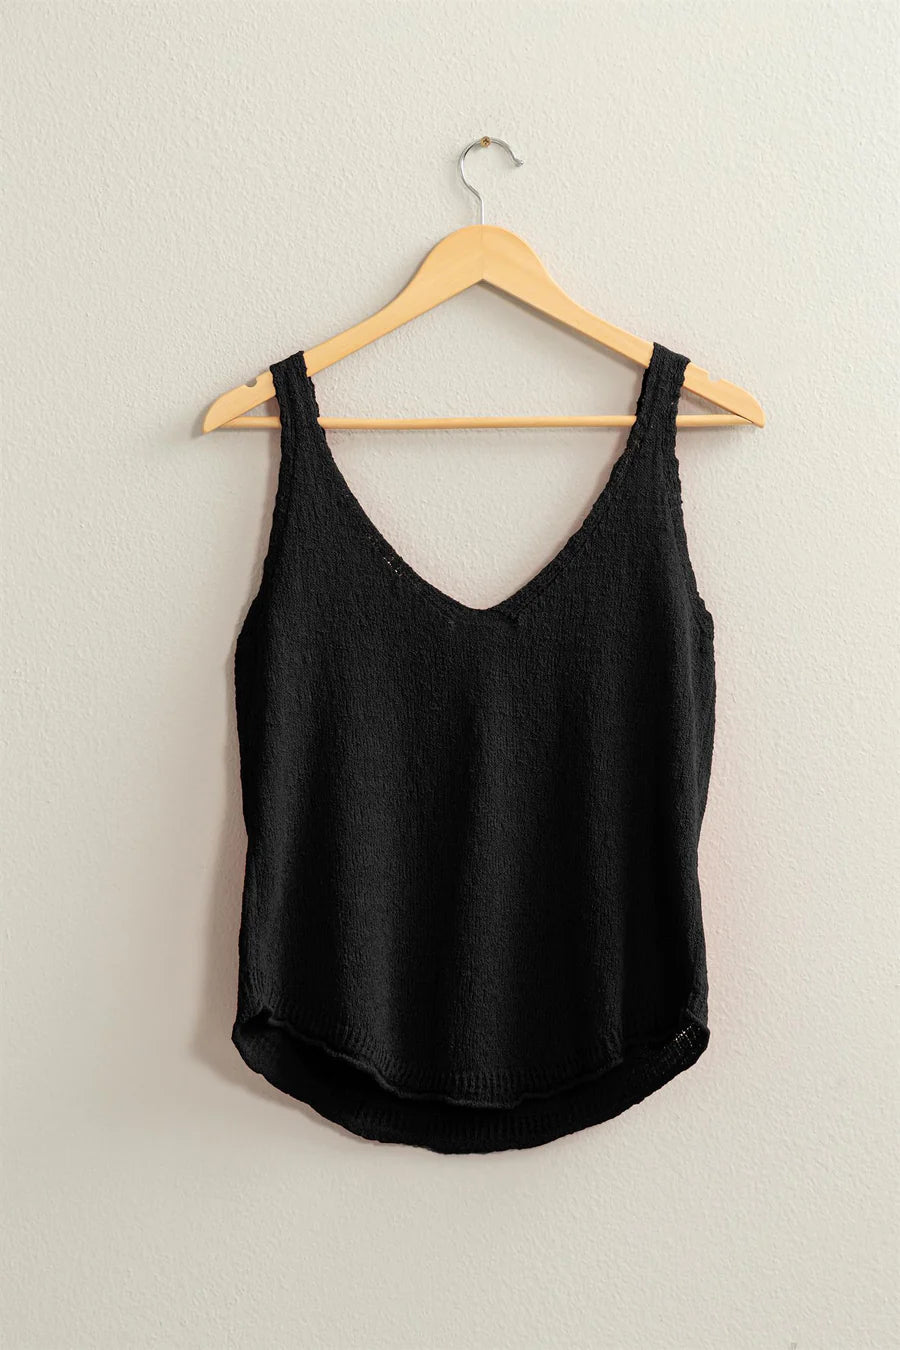 zoomed out view of black colored Terry Sleeveless Top with a V neck and shoulder straps, featuring a relaxed fit. Made from 75% cotton and 25% polyester, ideal for pairing with shorts, pants, or skirts